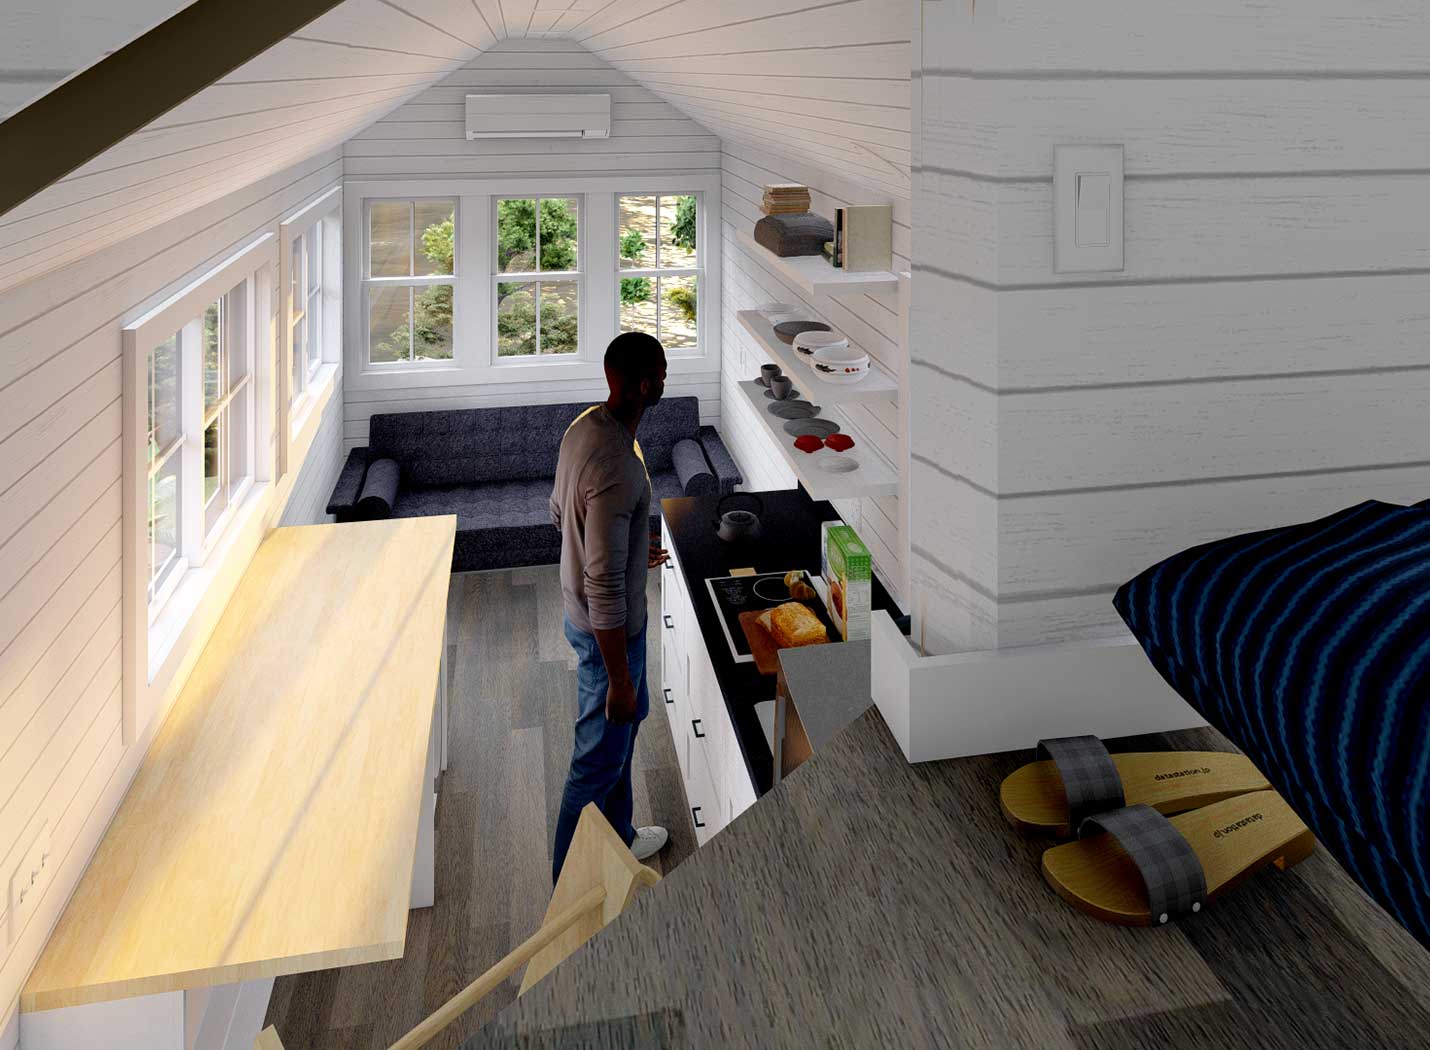 3d Rendering of the Majesty tiny home model in the Farmhouse style, showing the view down into the kichen, where someone cooks a meal, from the loft